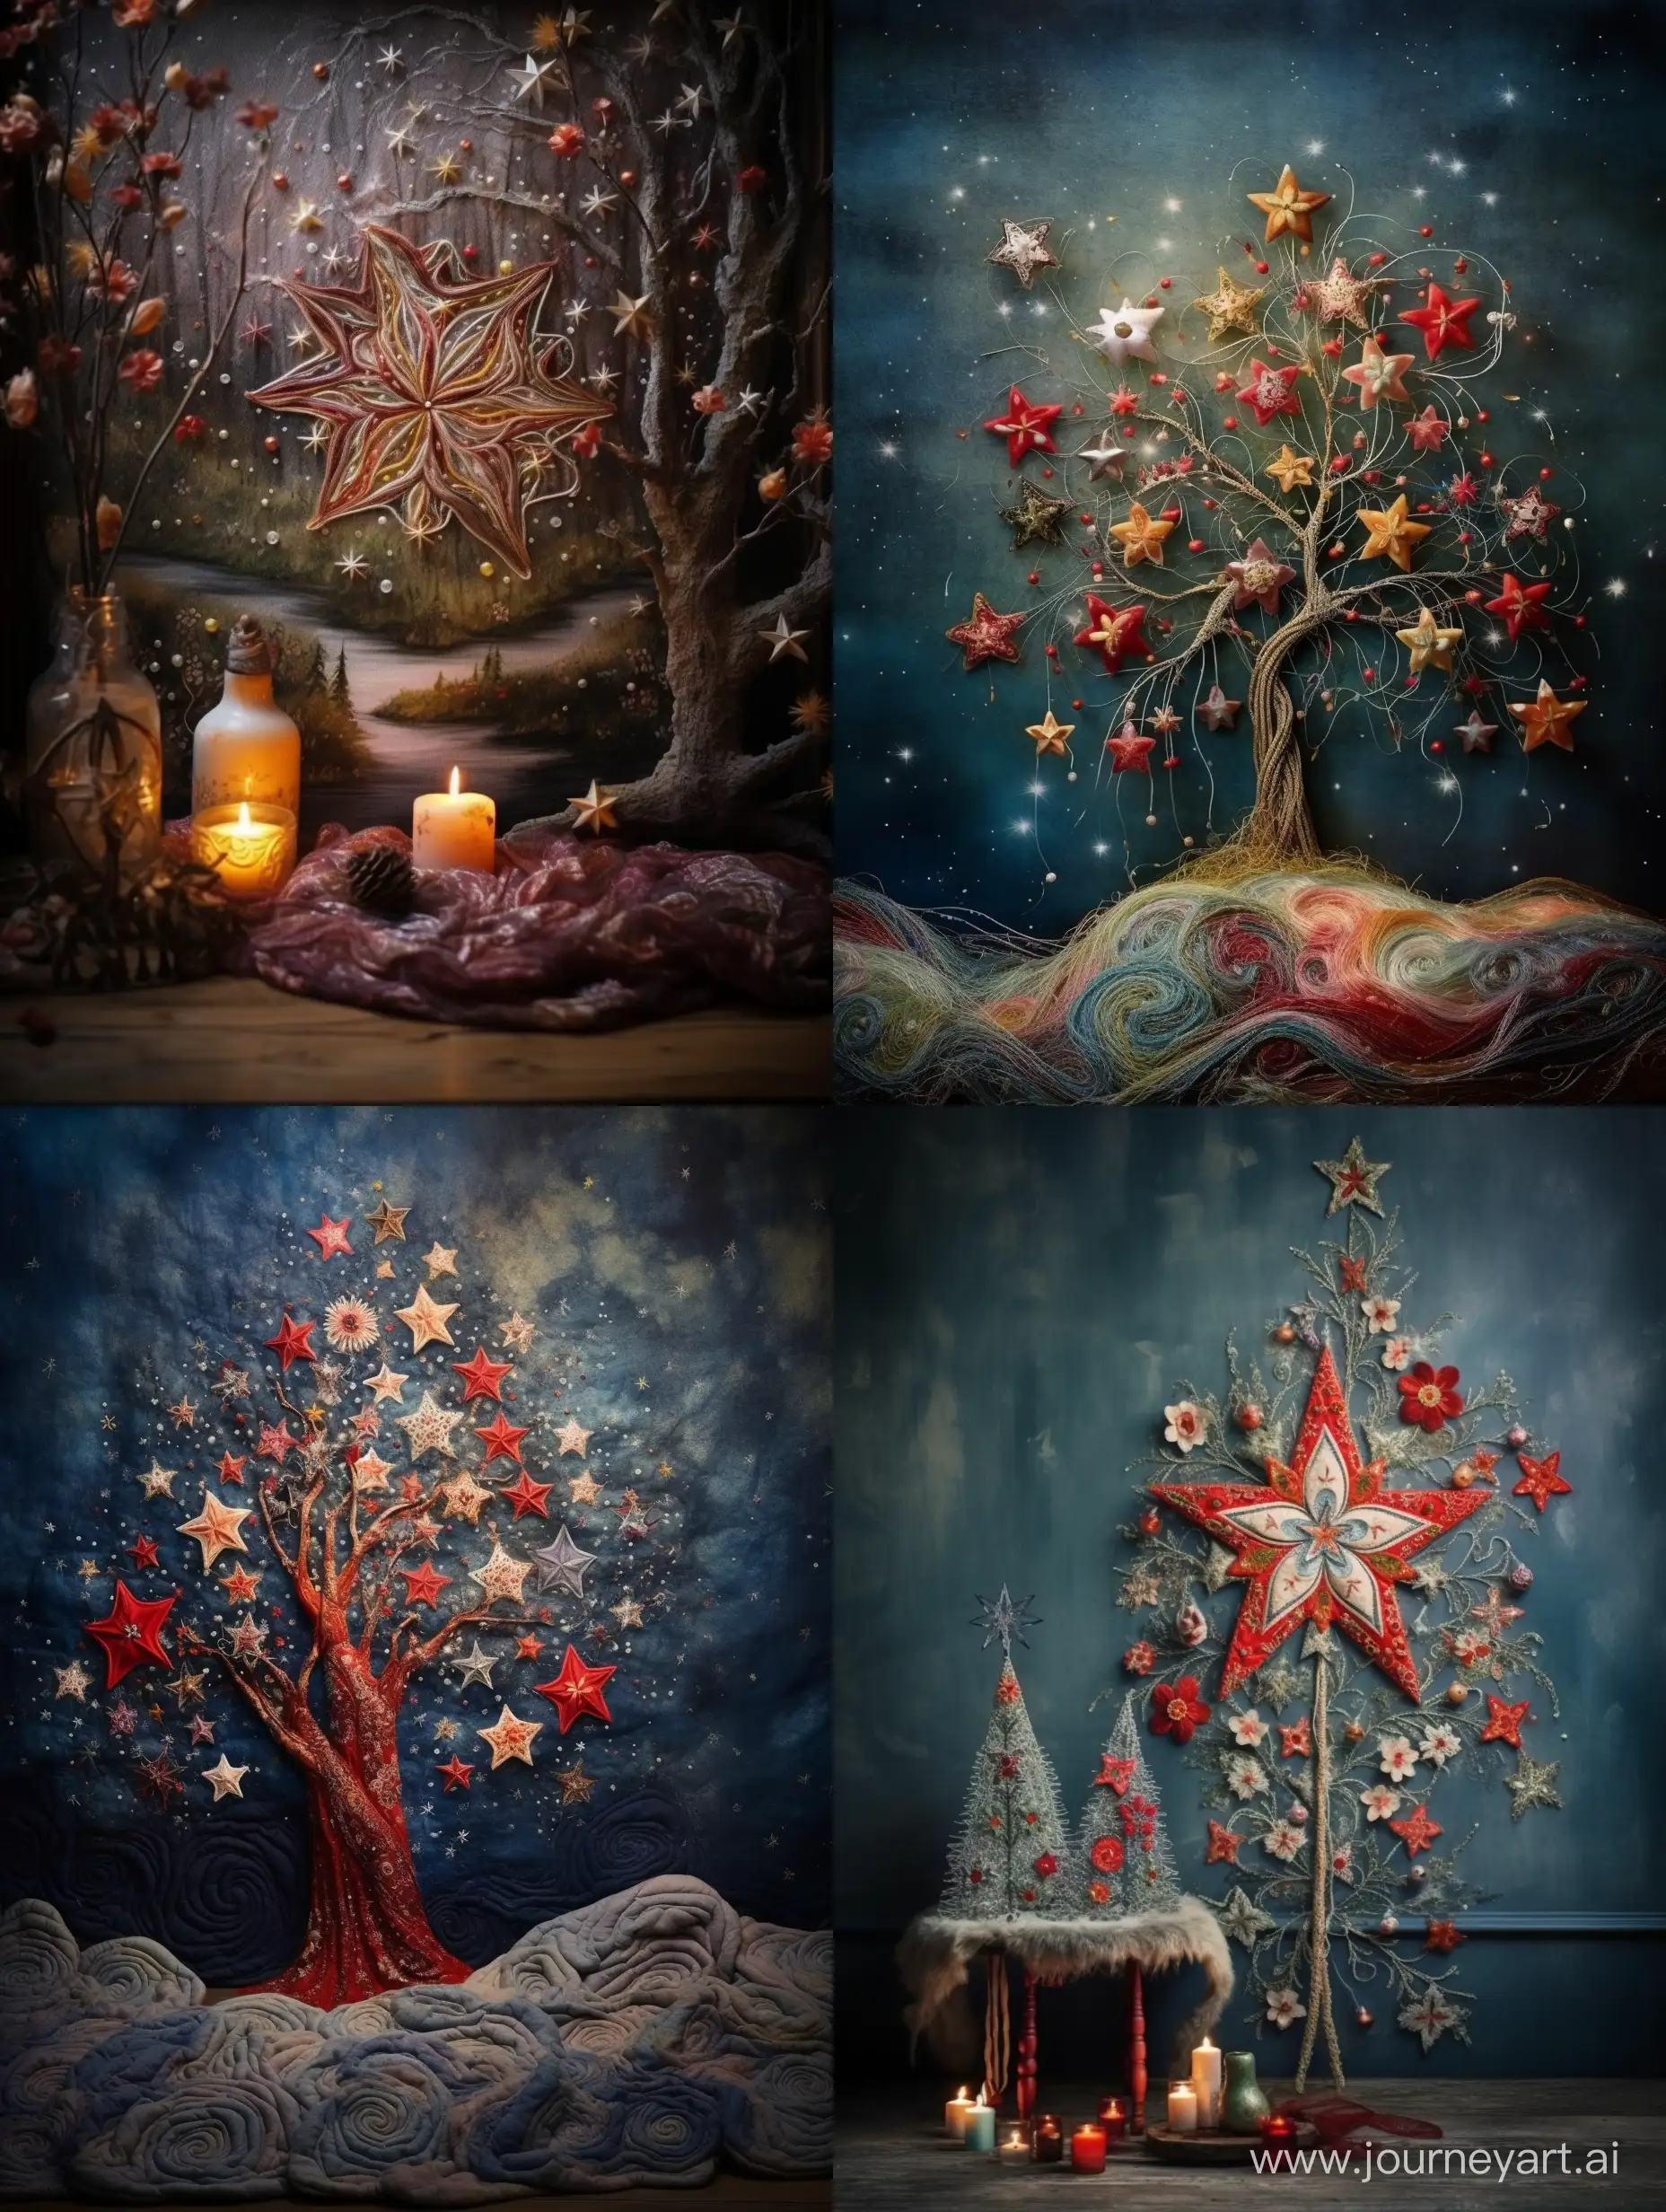 Exquisite-Fairy-Tale-Wool-Christmas-Star-with-Embroidery-and-Decorated-Tree